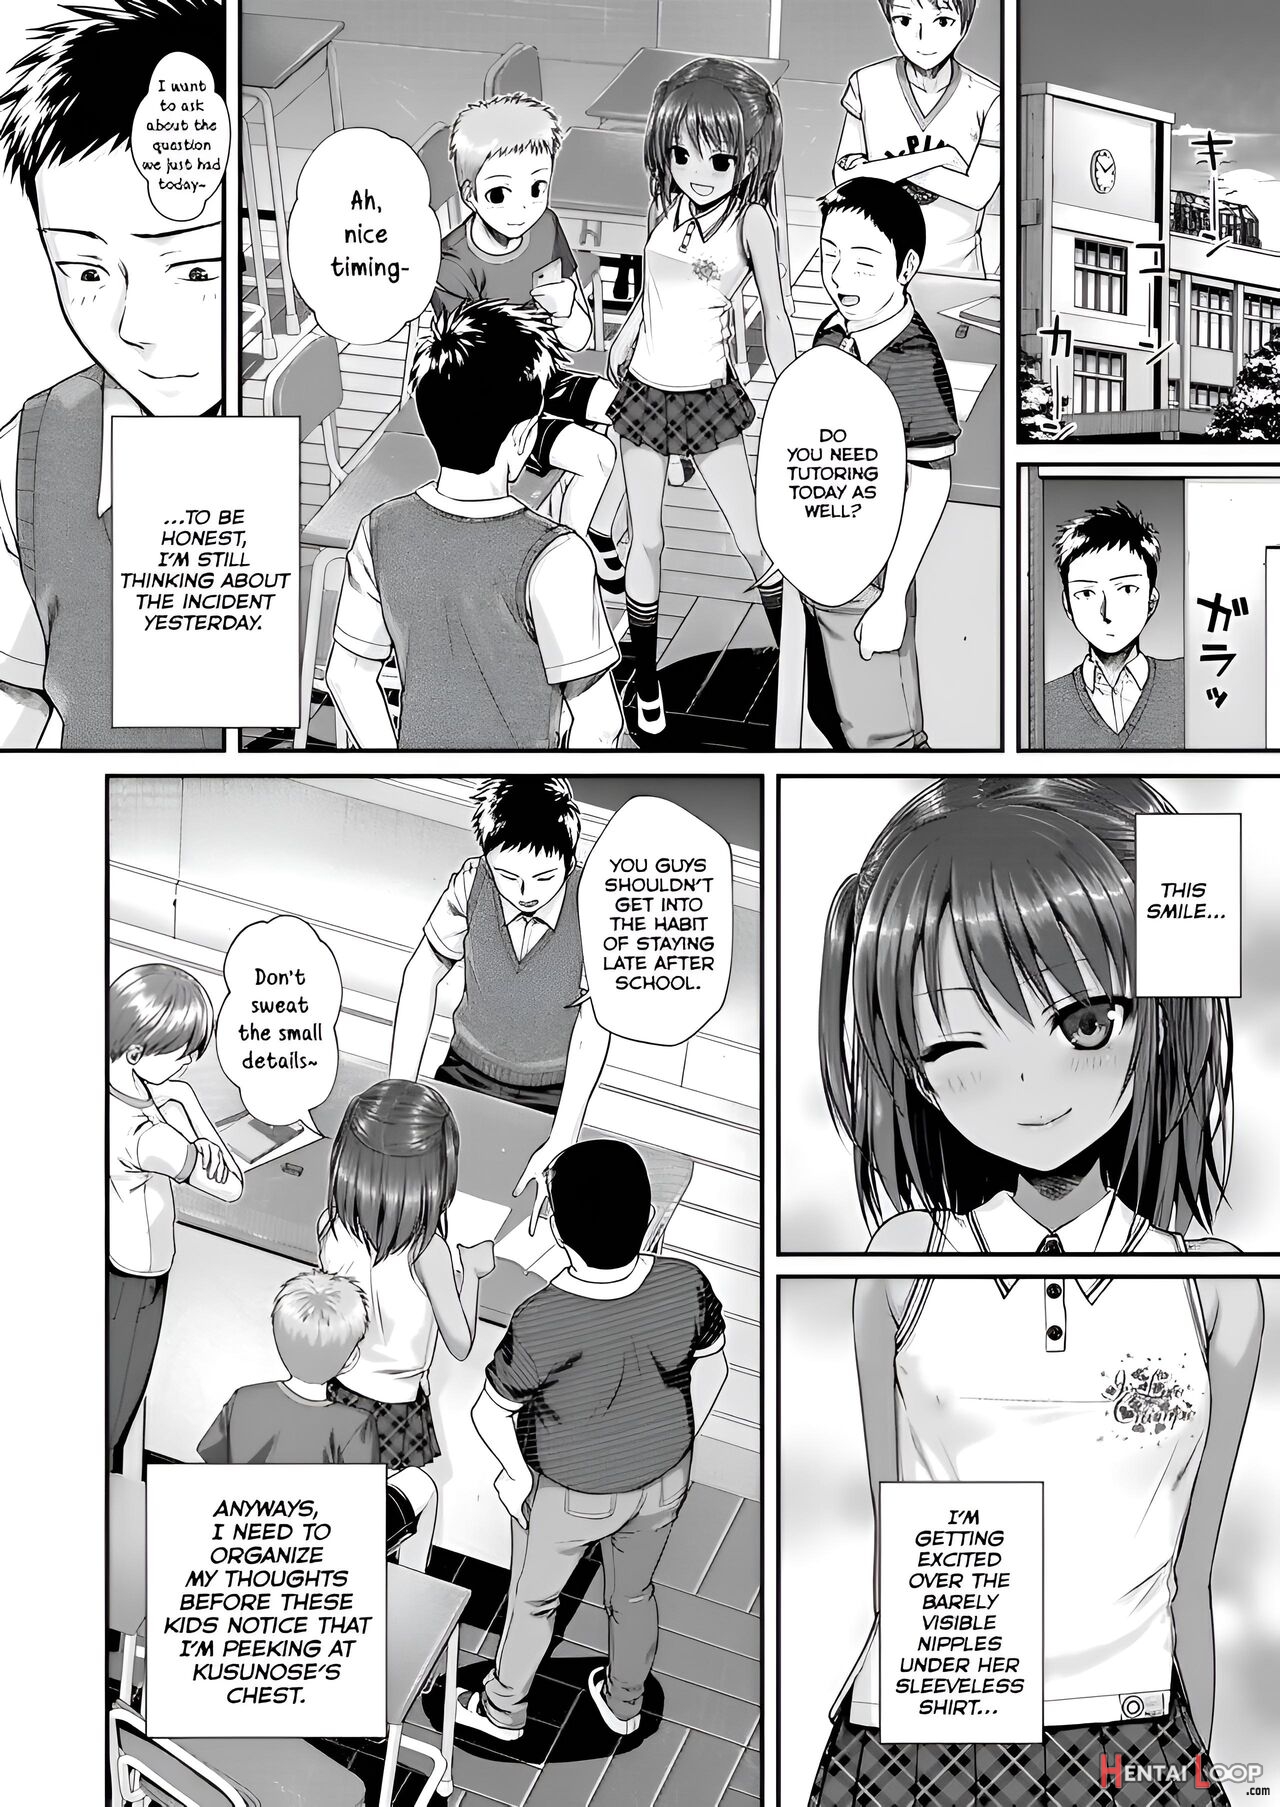 Together With Everyone After School 4k Edit page 8